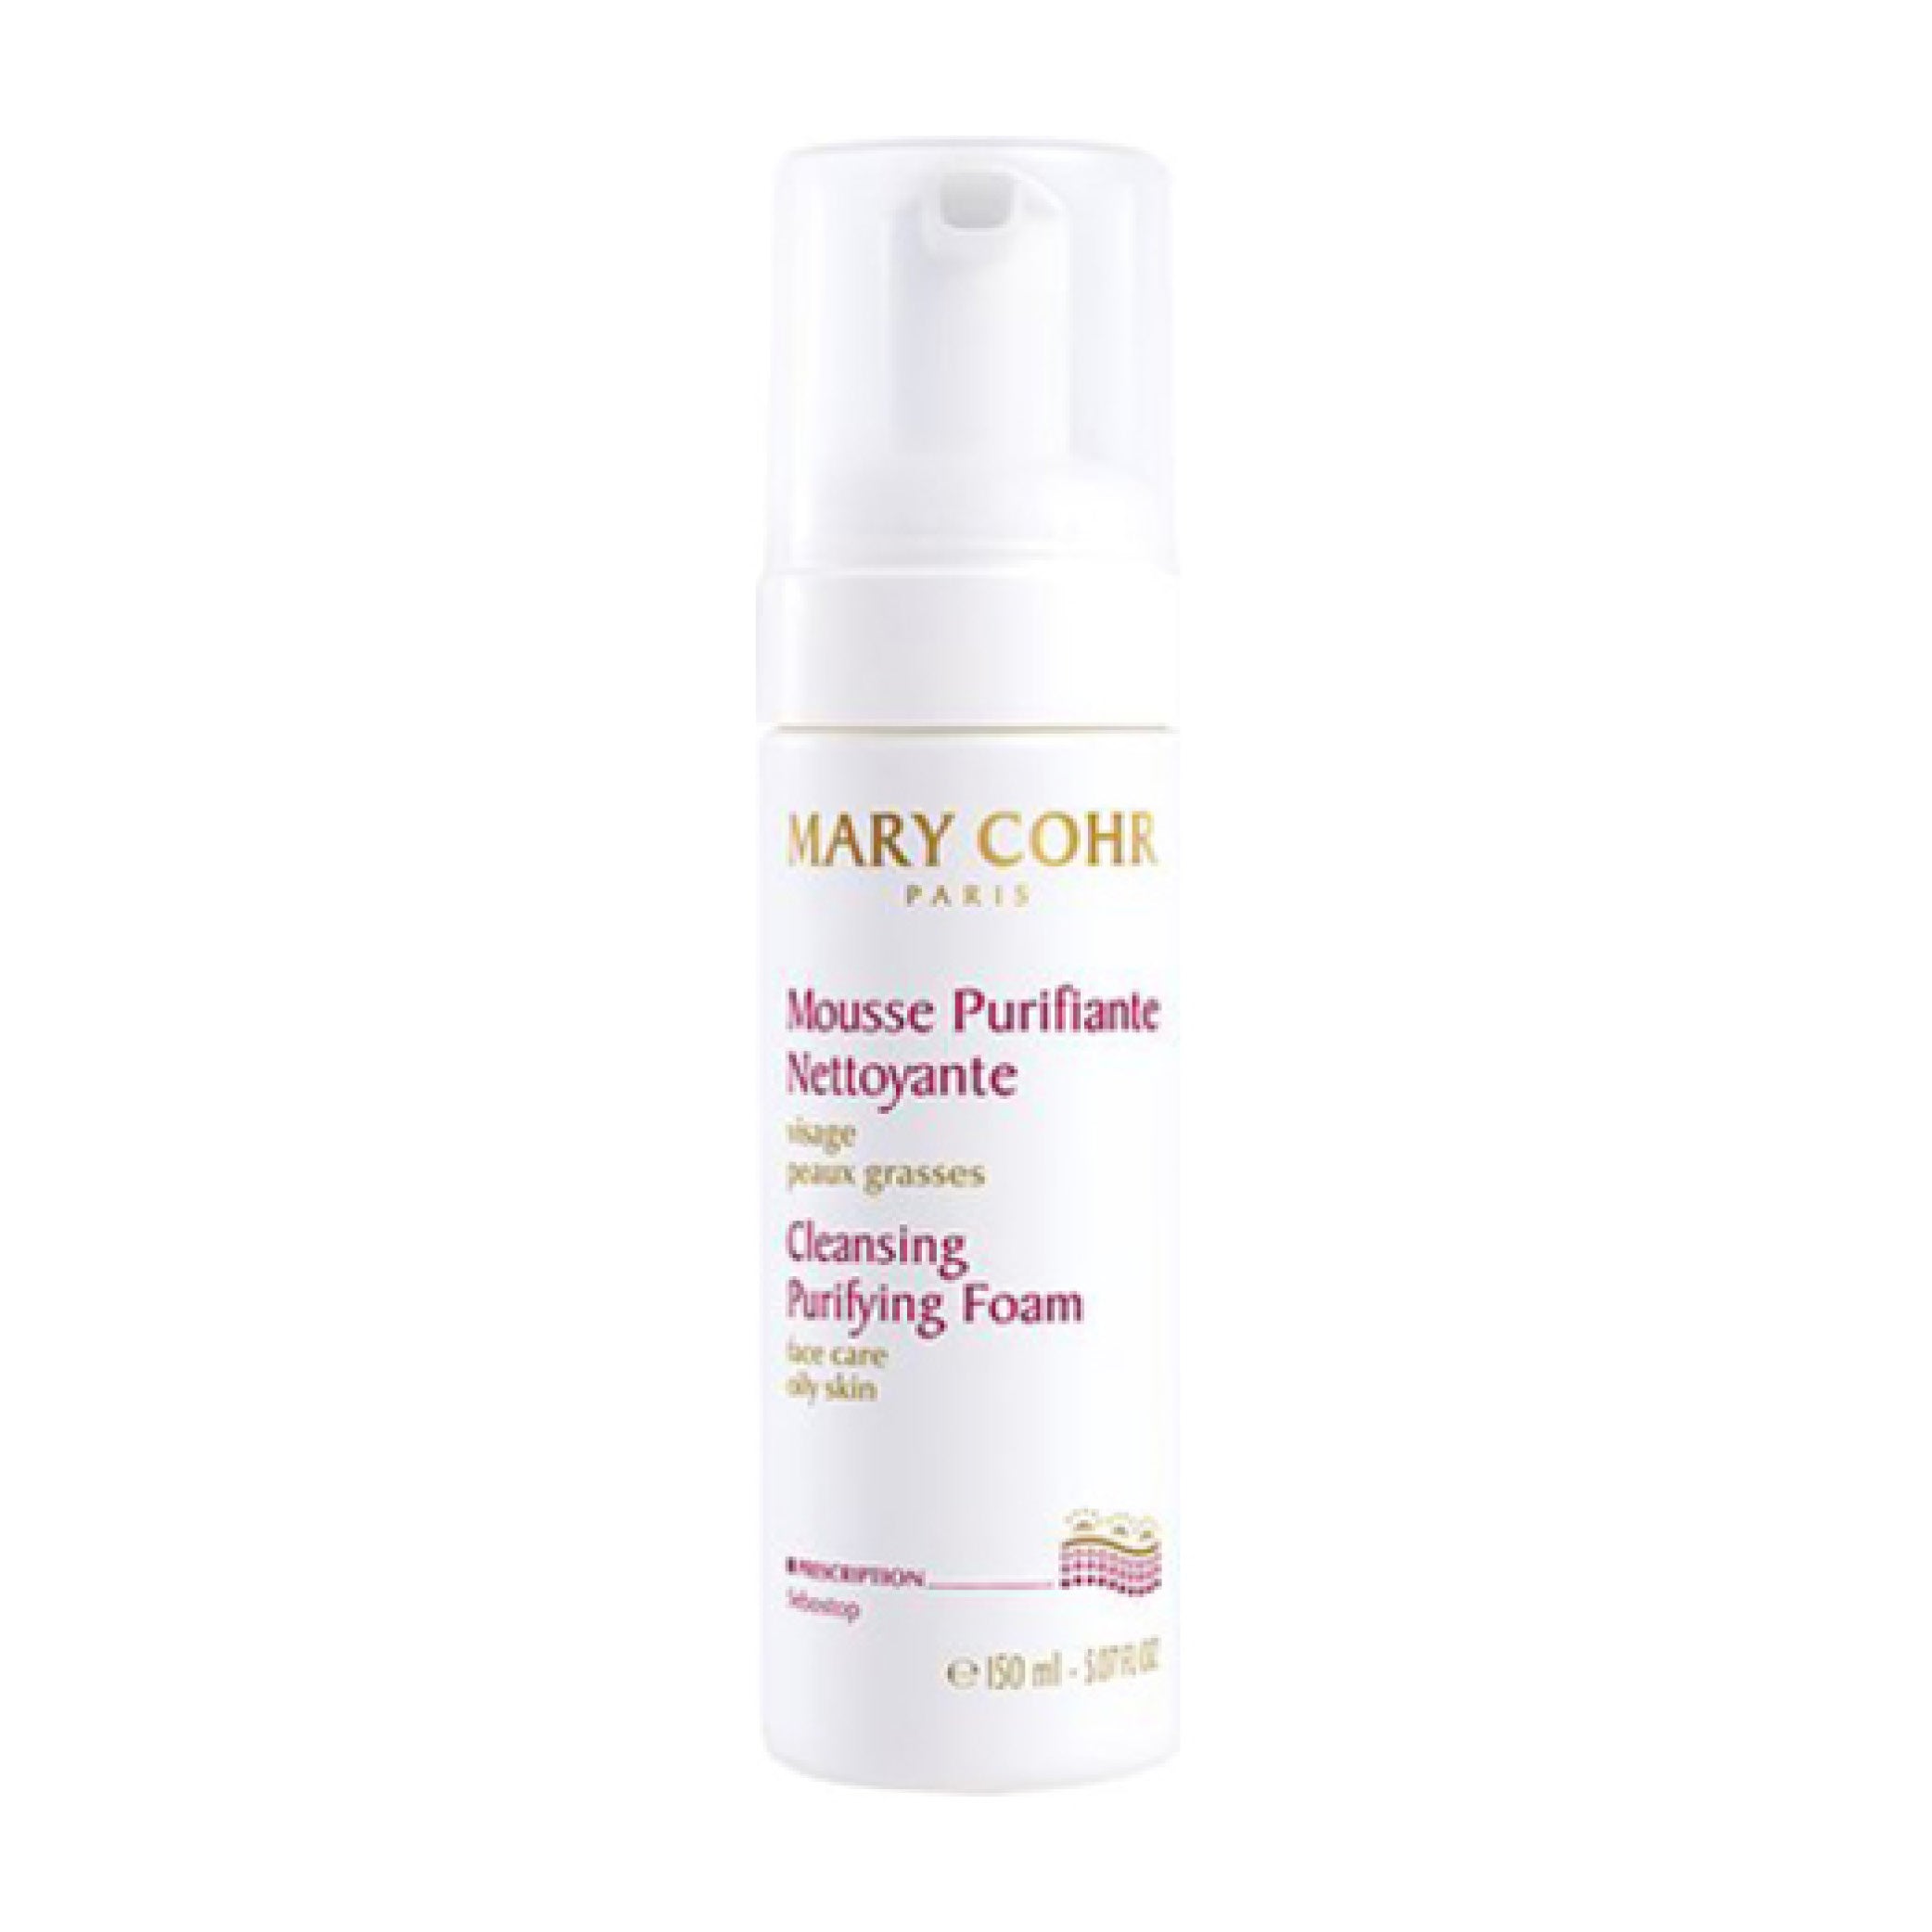 Cleansing Purifying Foam